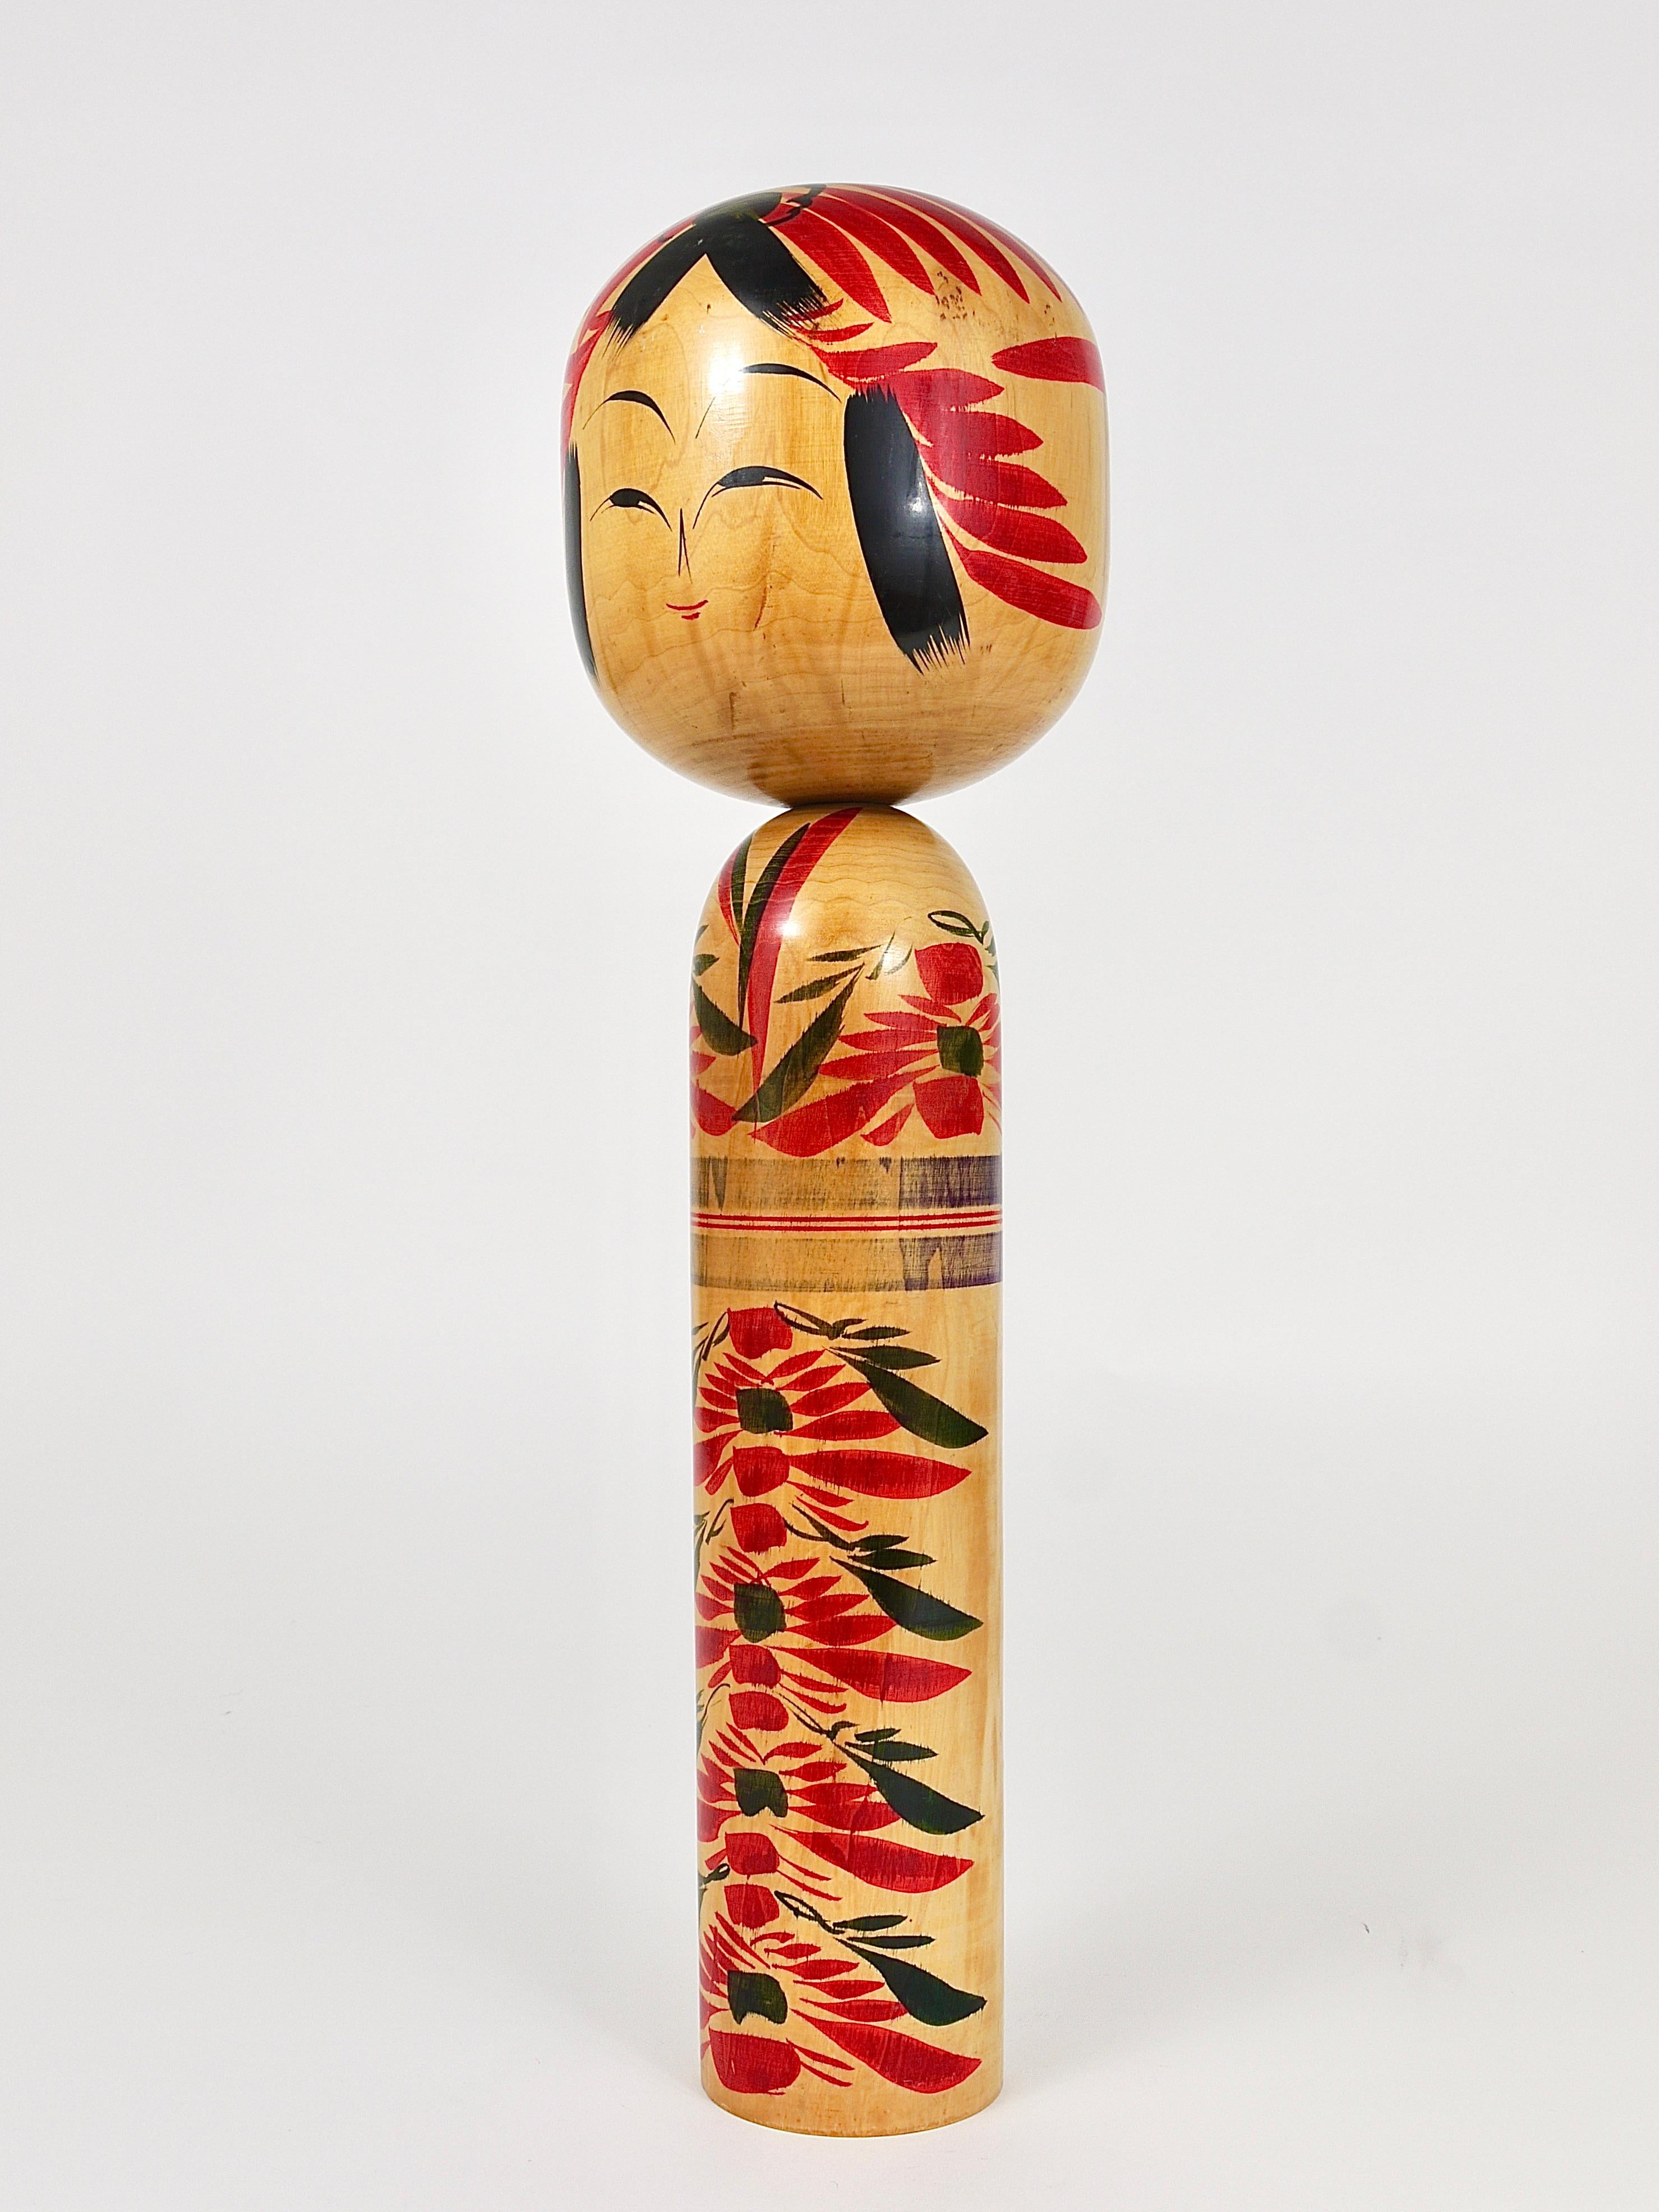 Japanese Decorative Kokeshi Doll Sculpture from Northern Japan, Hand-Painted, Signed